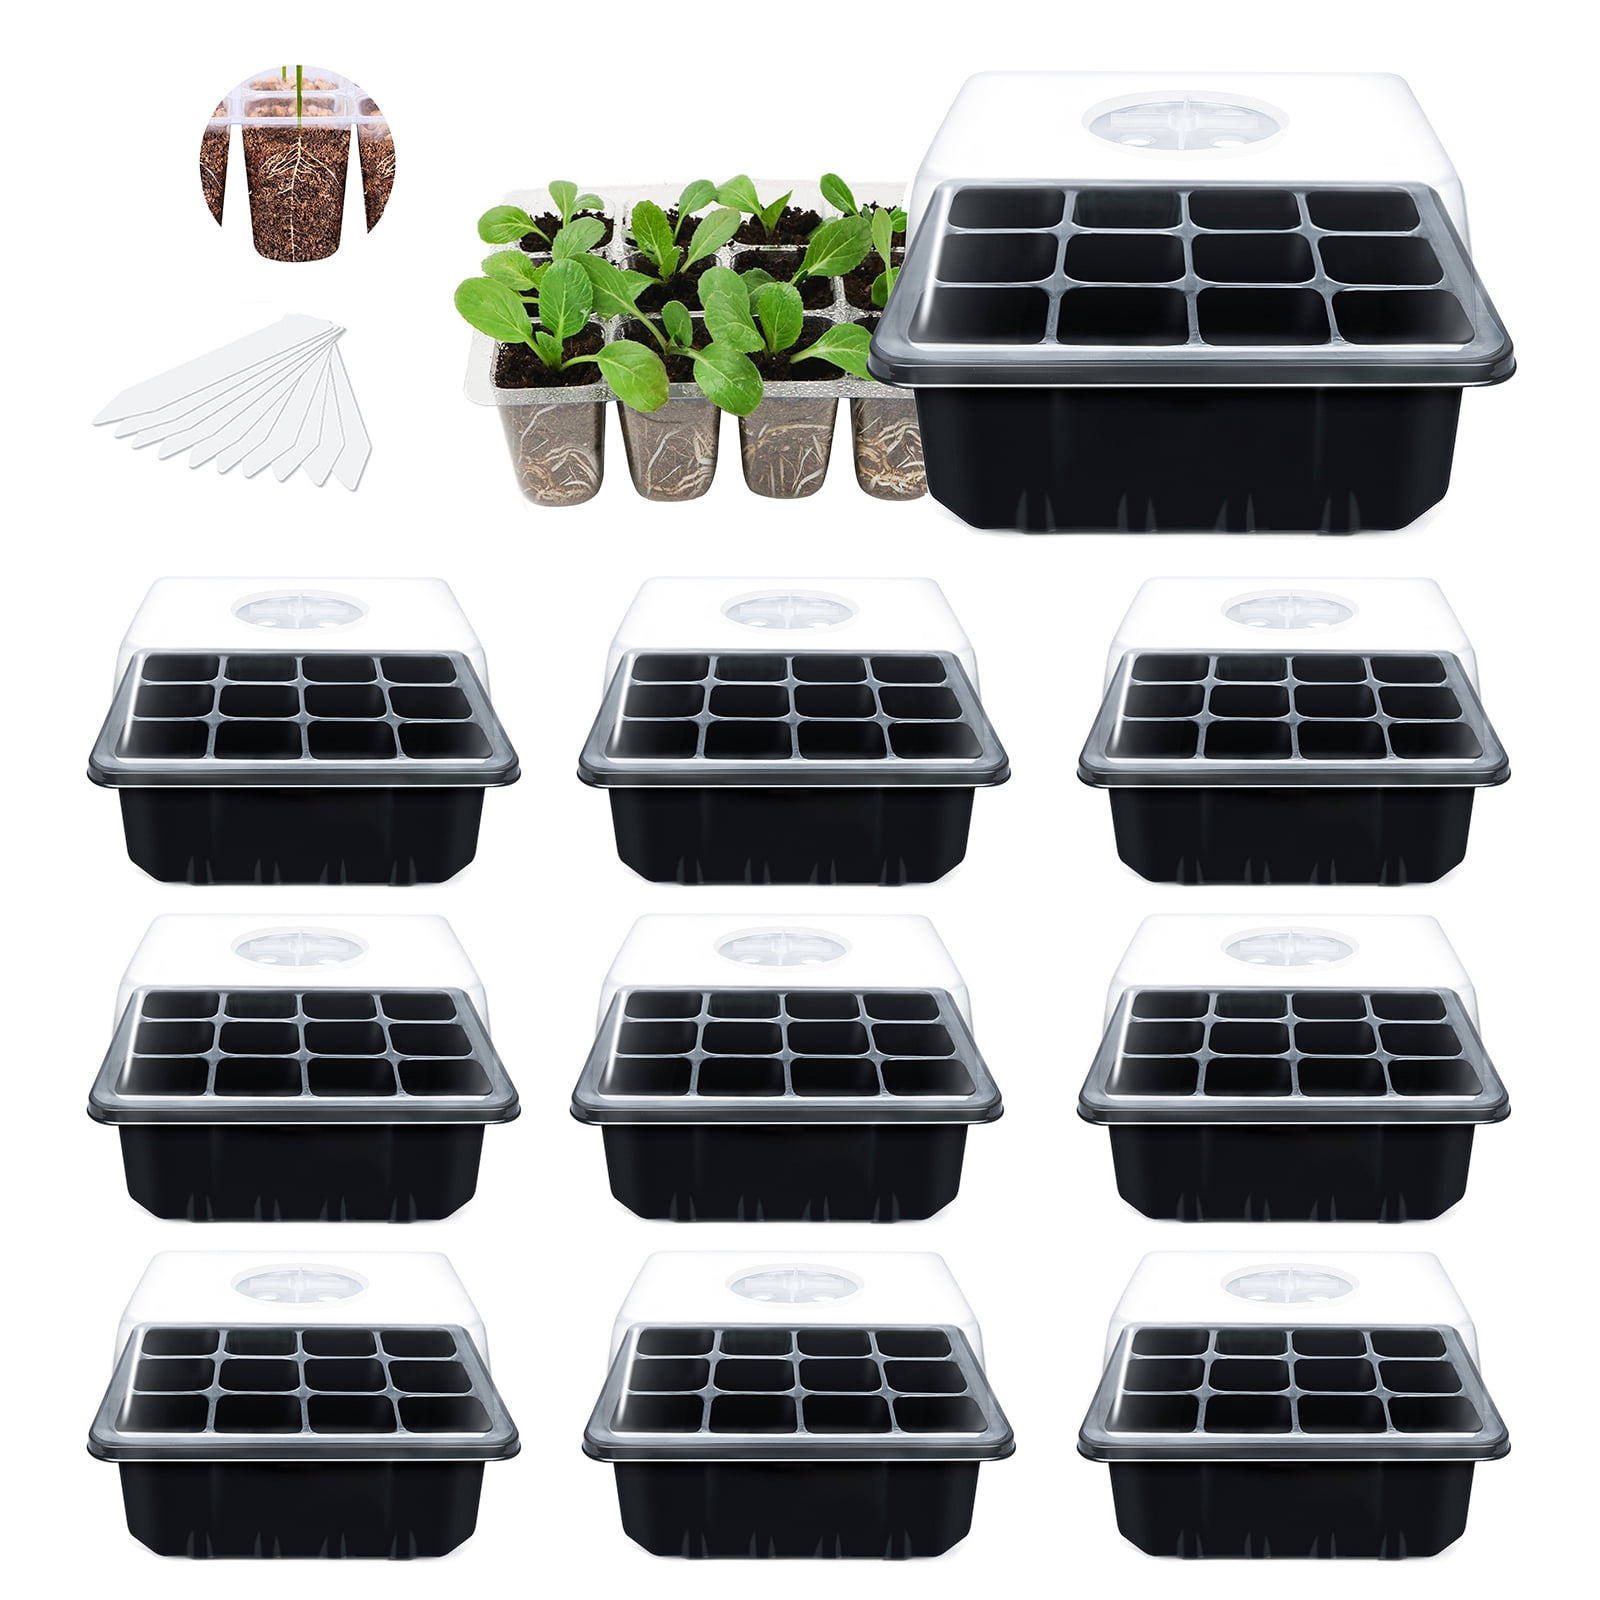 JORKING 10 Packs Seed Starter Trays with Humidity Dome